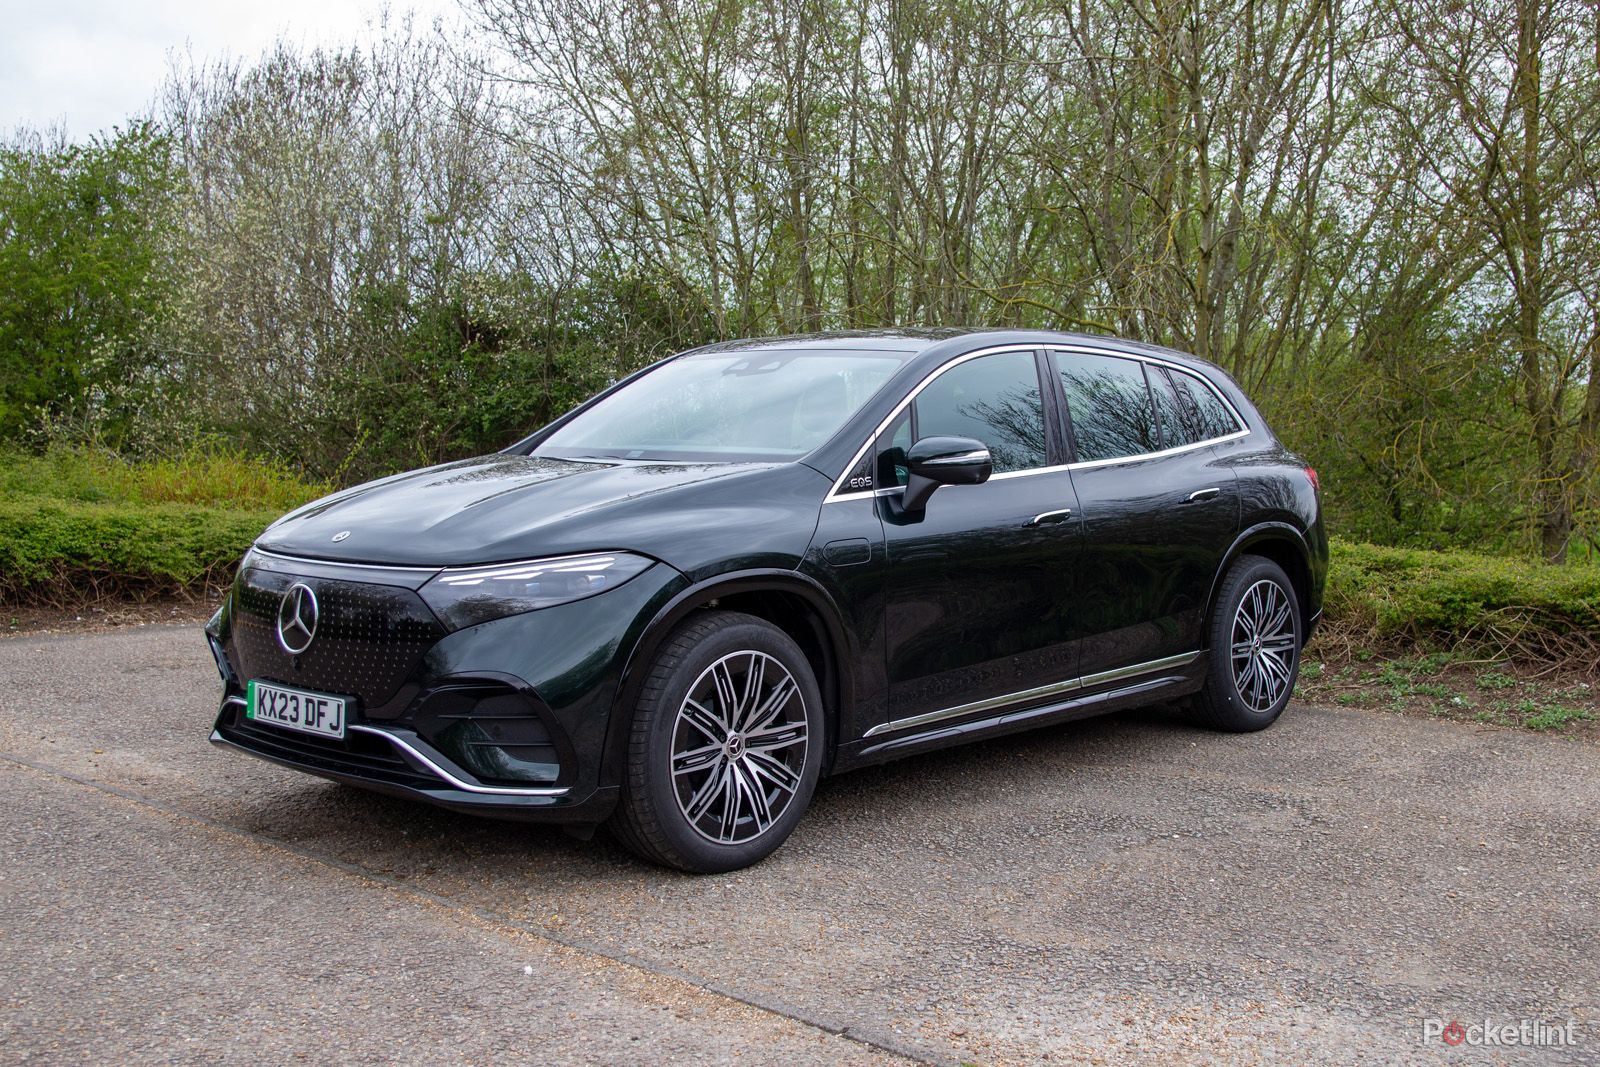 Mercedes EQS SUV review: Another dimension in EV luxury